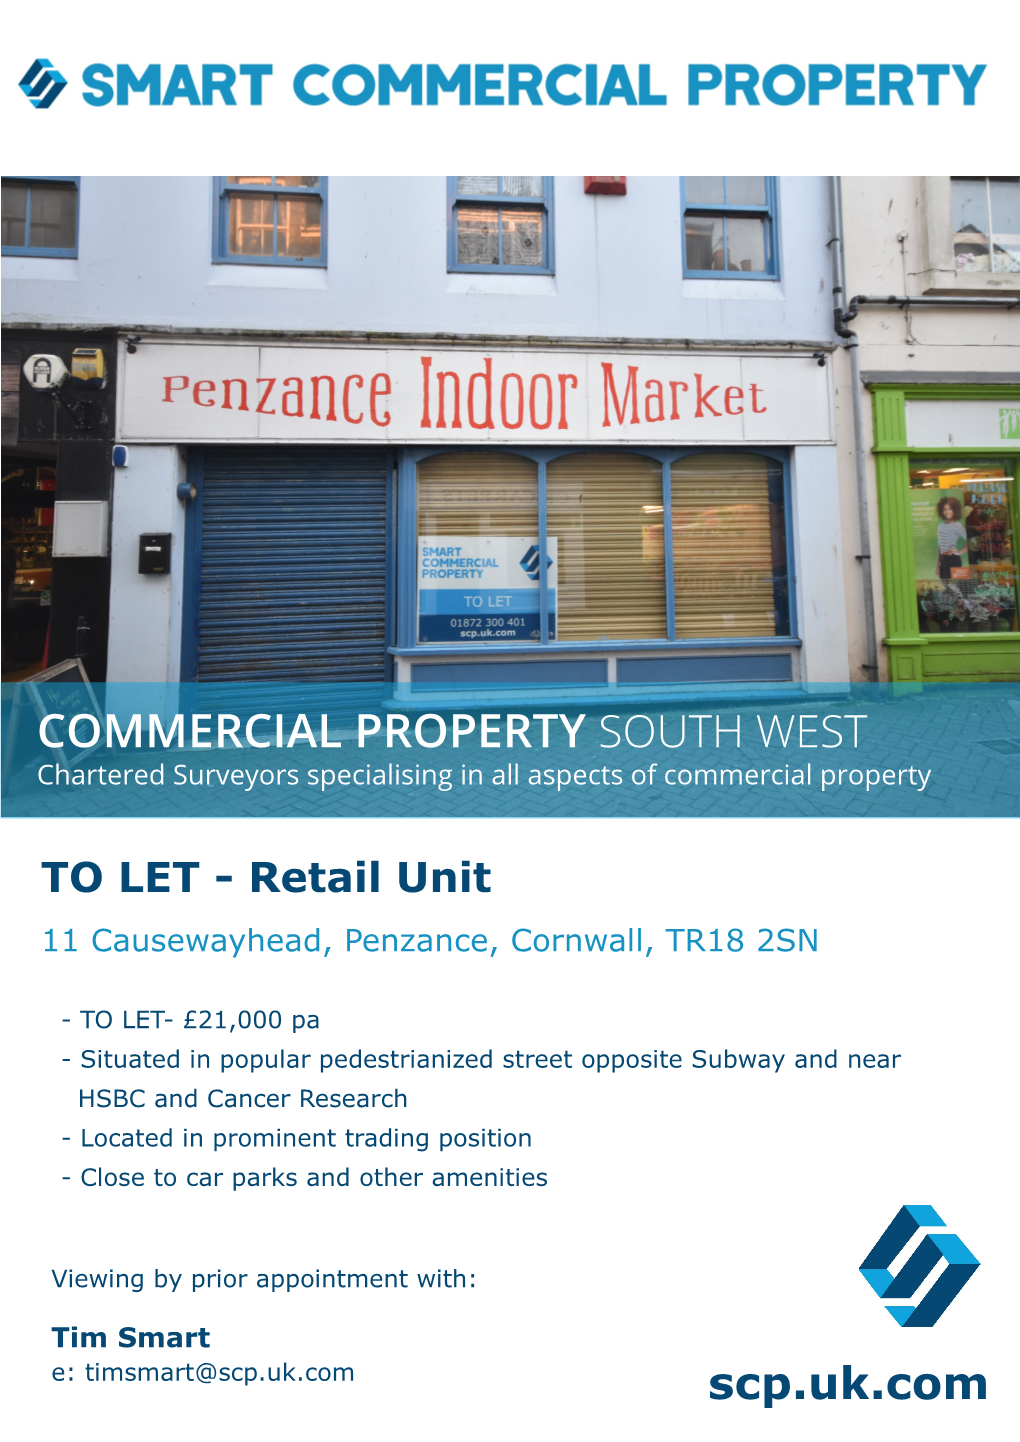 COMMERCIAL PROPERTY SOUTH WEST Chartered Surveyors Specialising in All Aspects of Commercial Property